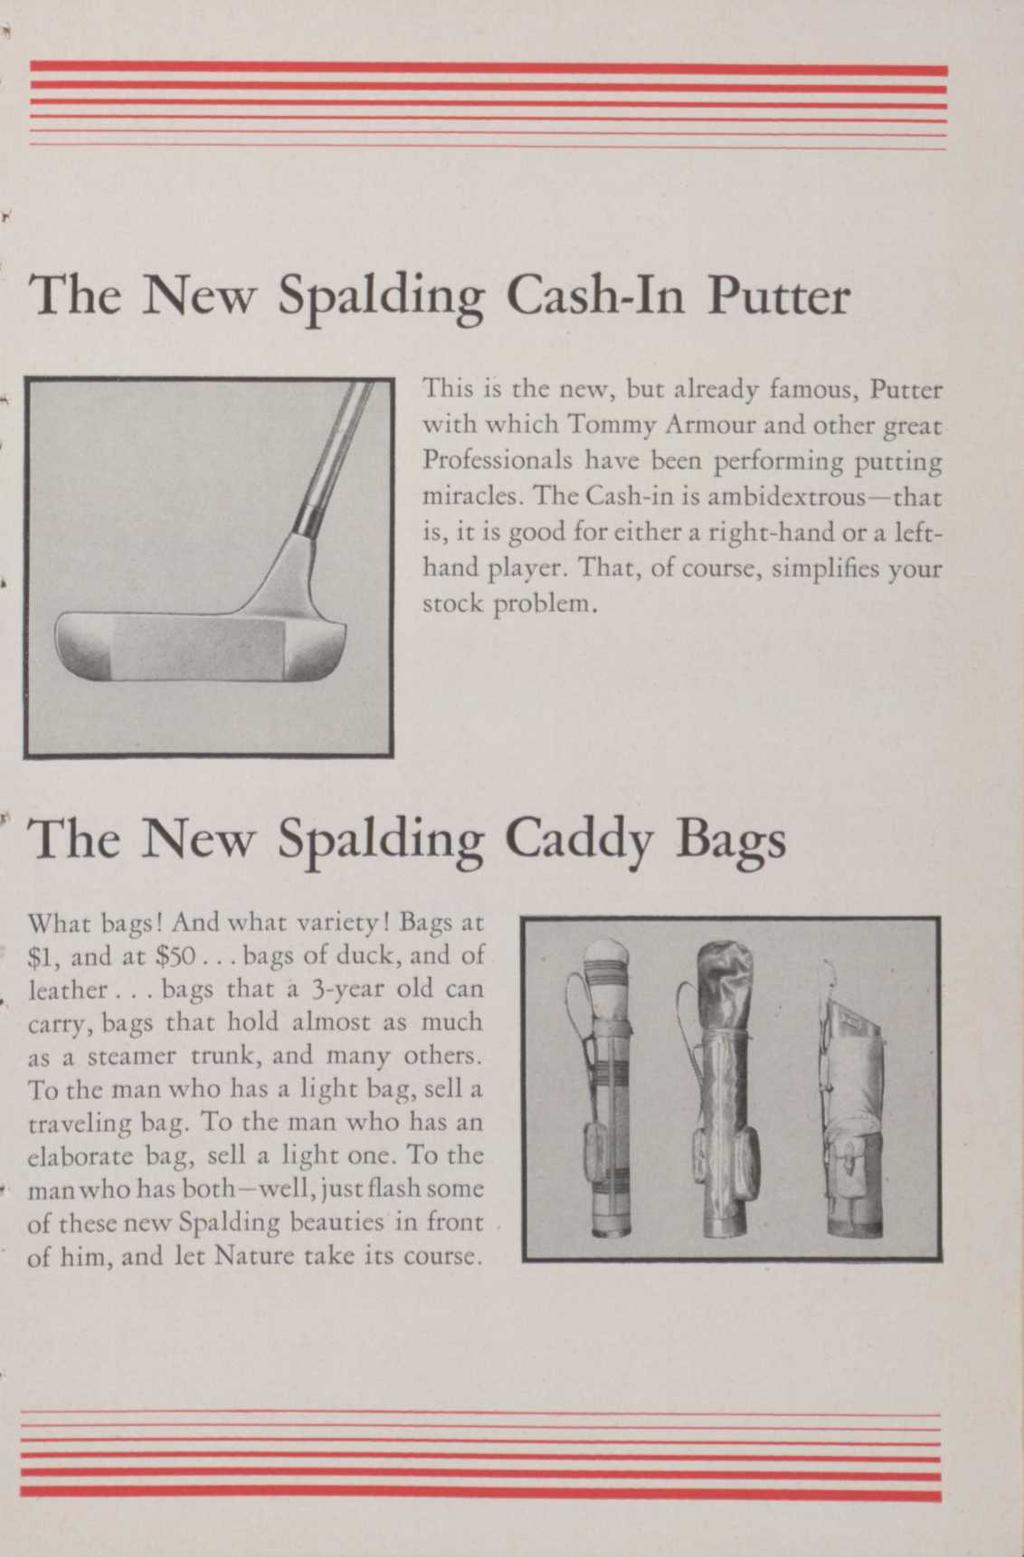 The New Spalding Cash-In Putter This is the new, but already famous, Putter with which Tommy Armour and other great Professionals have been performing putting miracles.